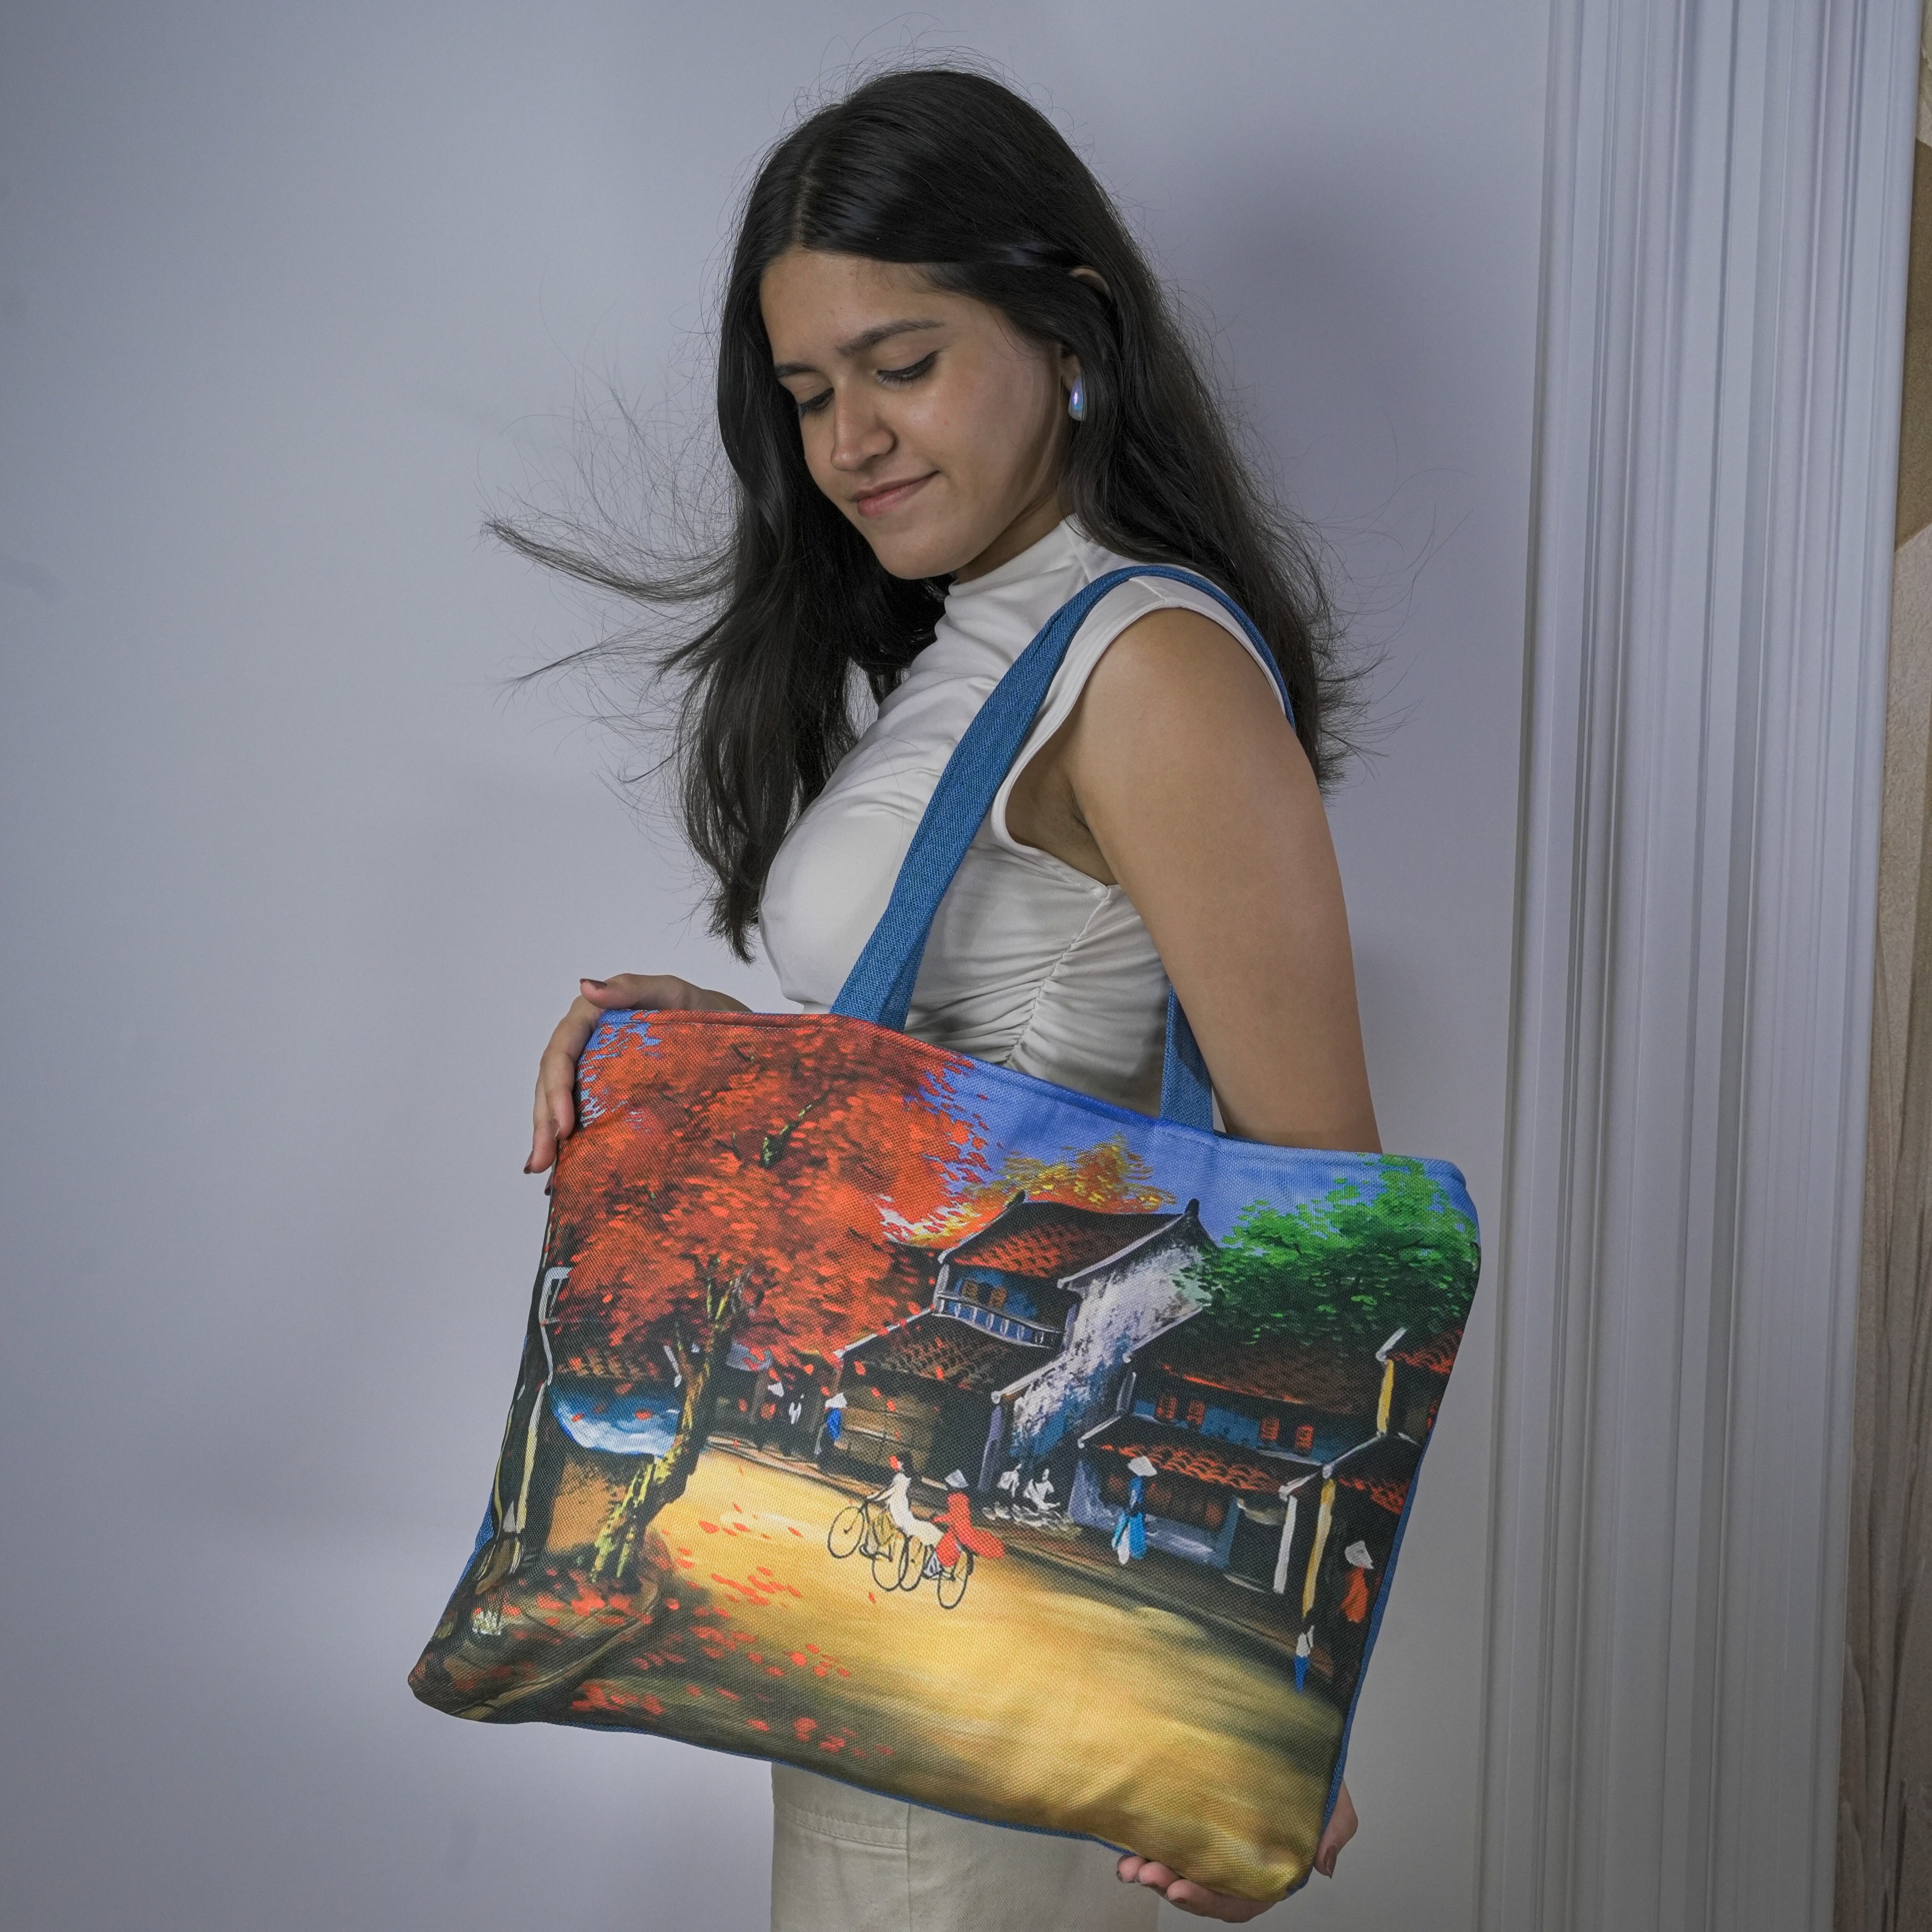 Natures Canvas Tote Bag